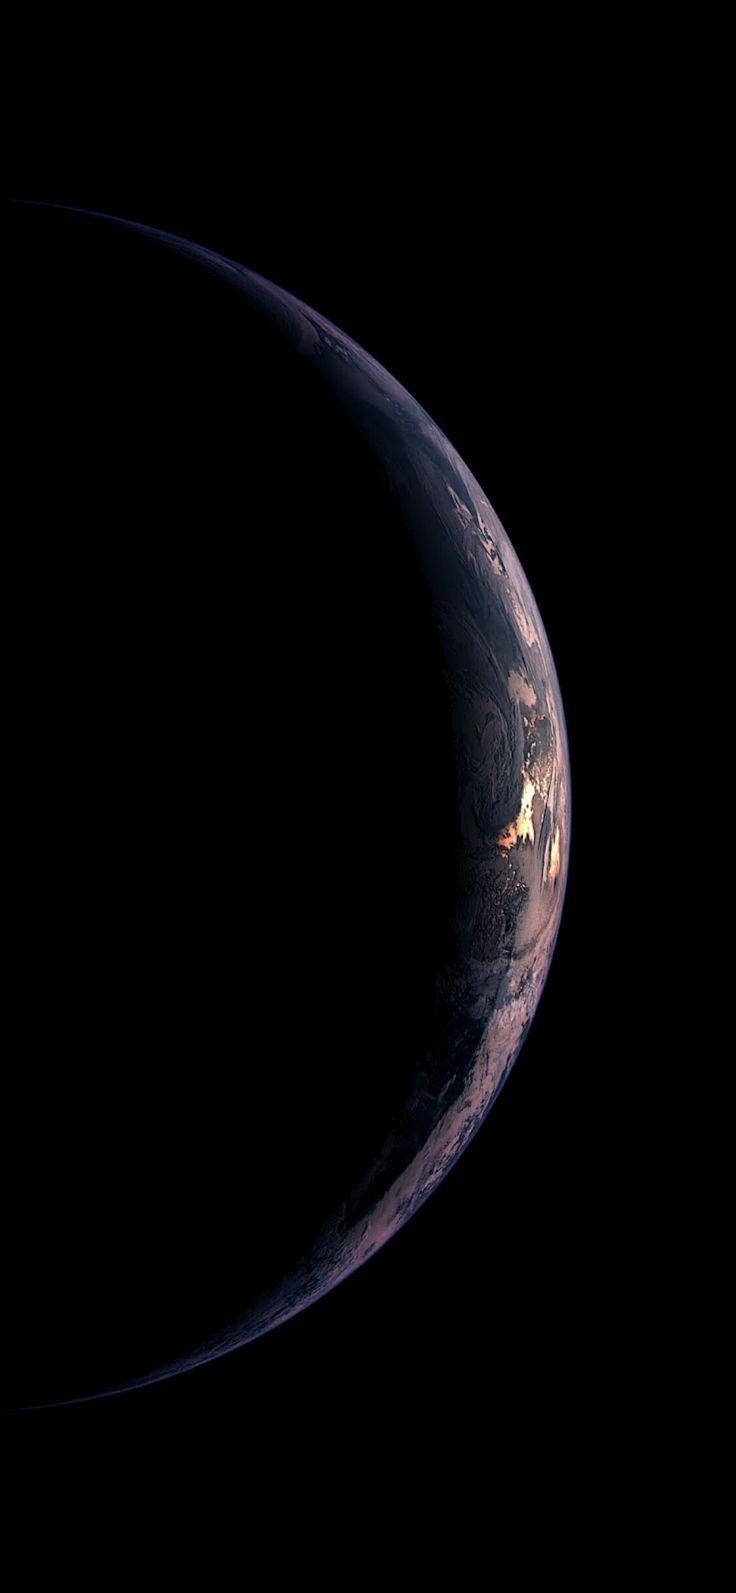 Distinctive Iphone X Amoled Display Featuring A High-resolution Planet Surface Image. Wallpaper